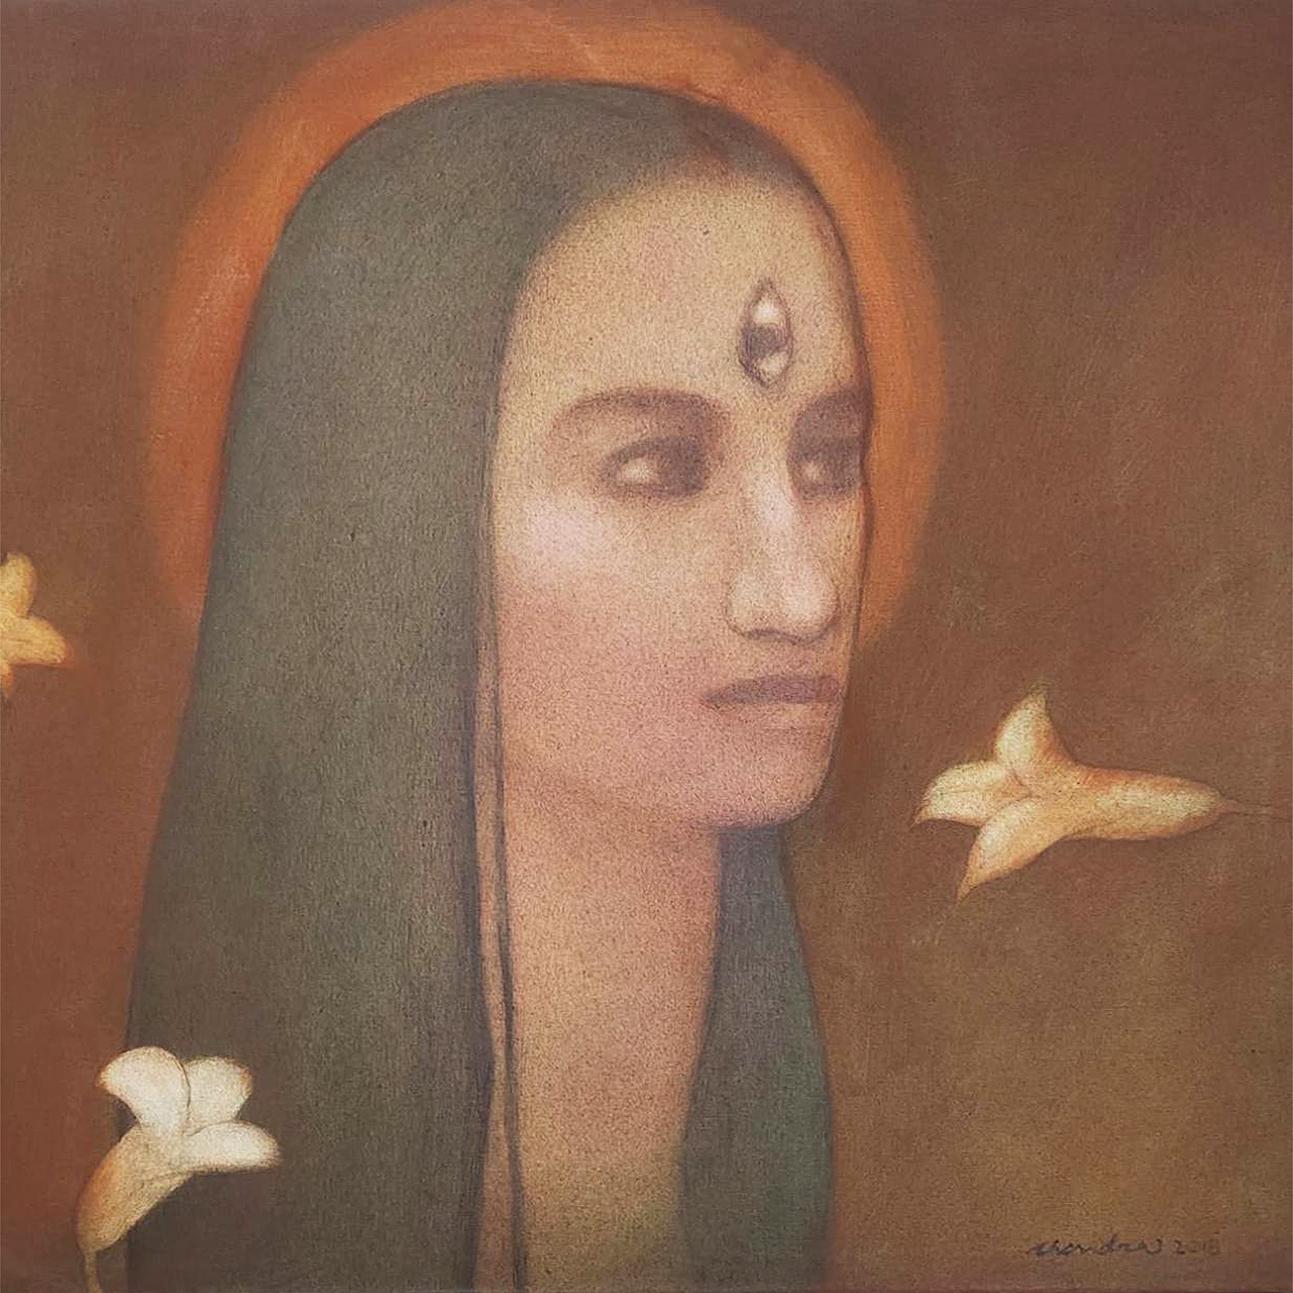 Chandra Bhattacharya Figurative Painting - Face, Acrylic on Canvas, Brown, Black Colors by Contemporary Artist “In Stock”